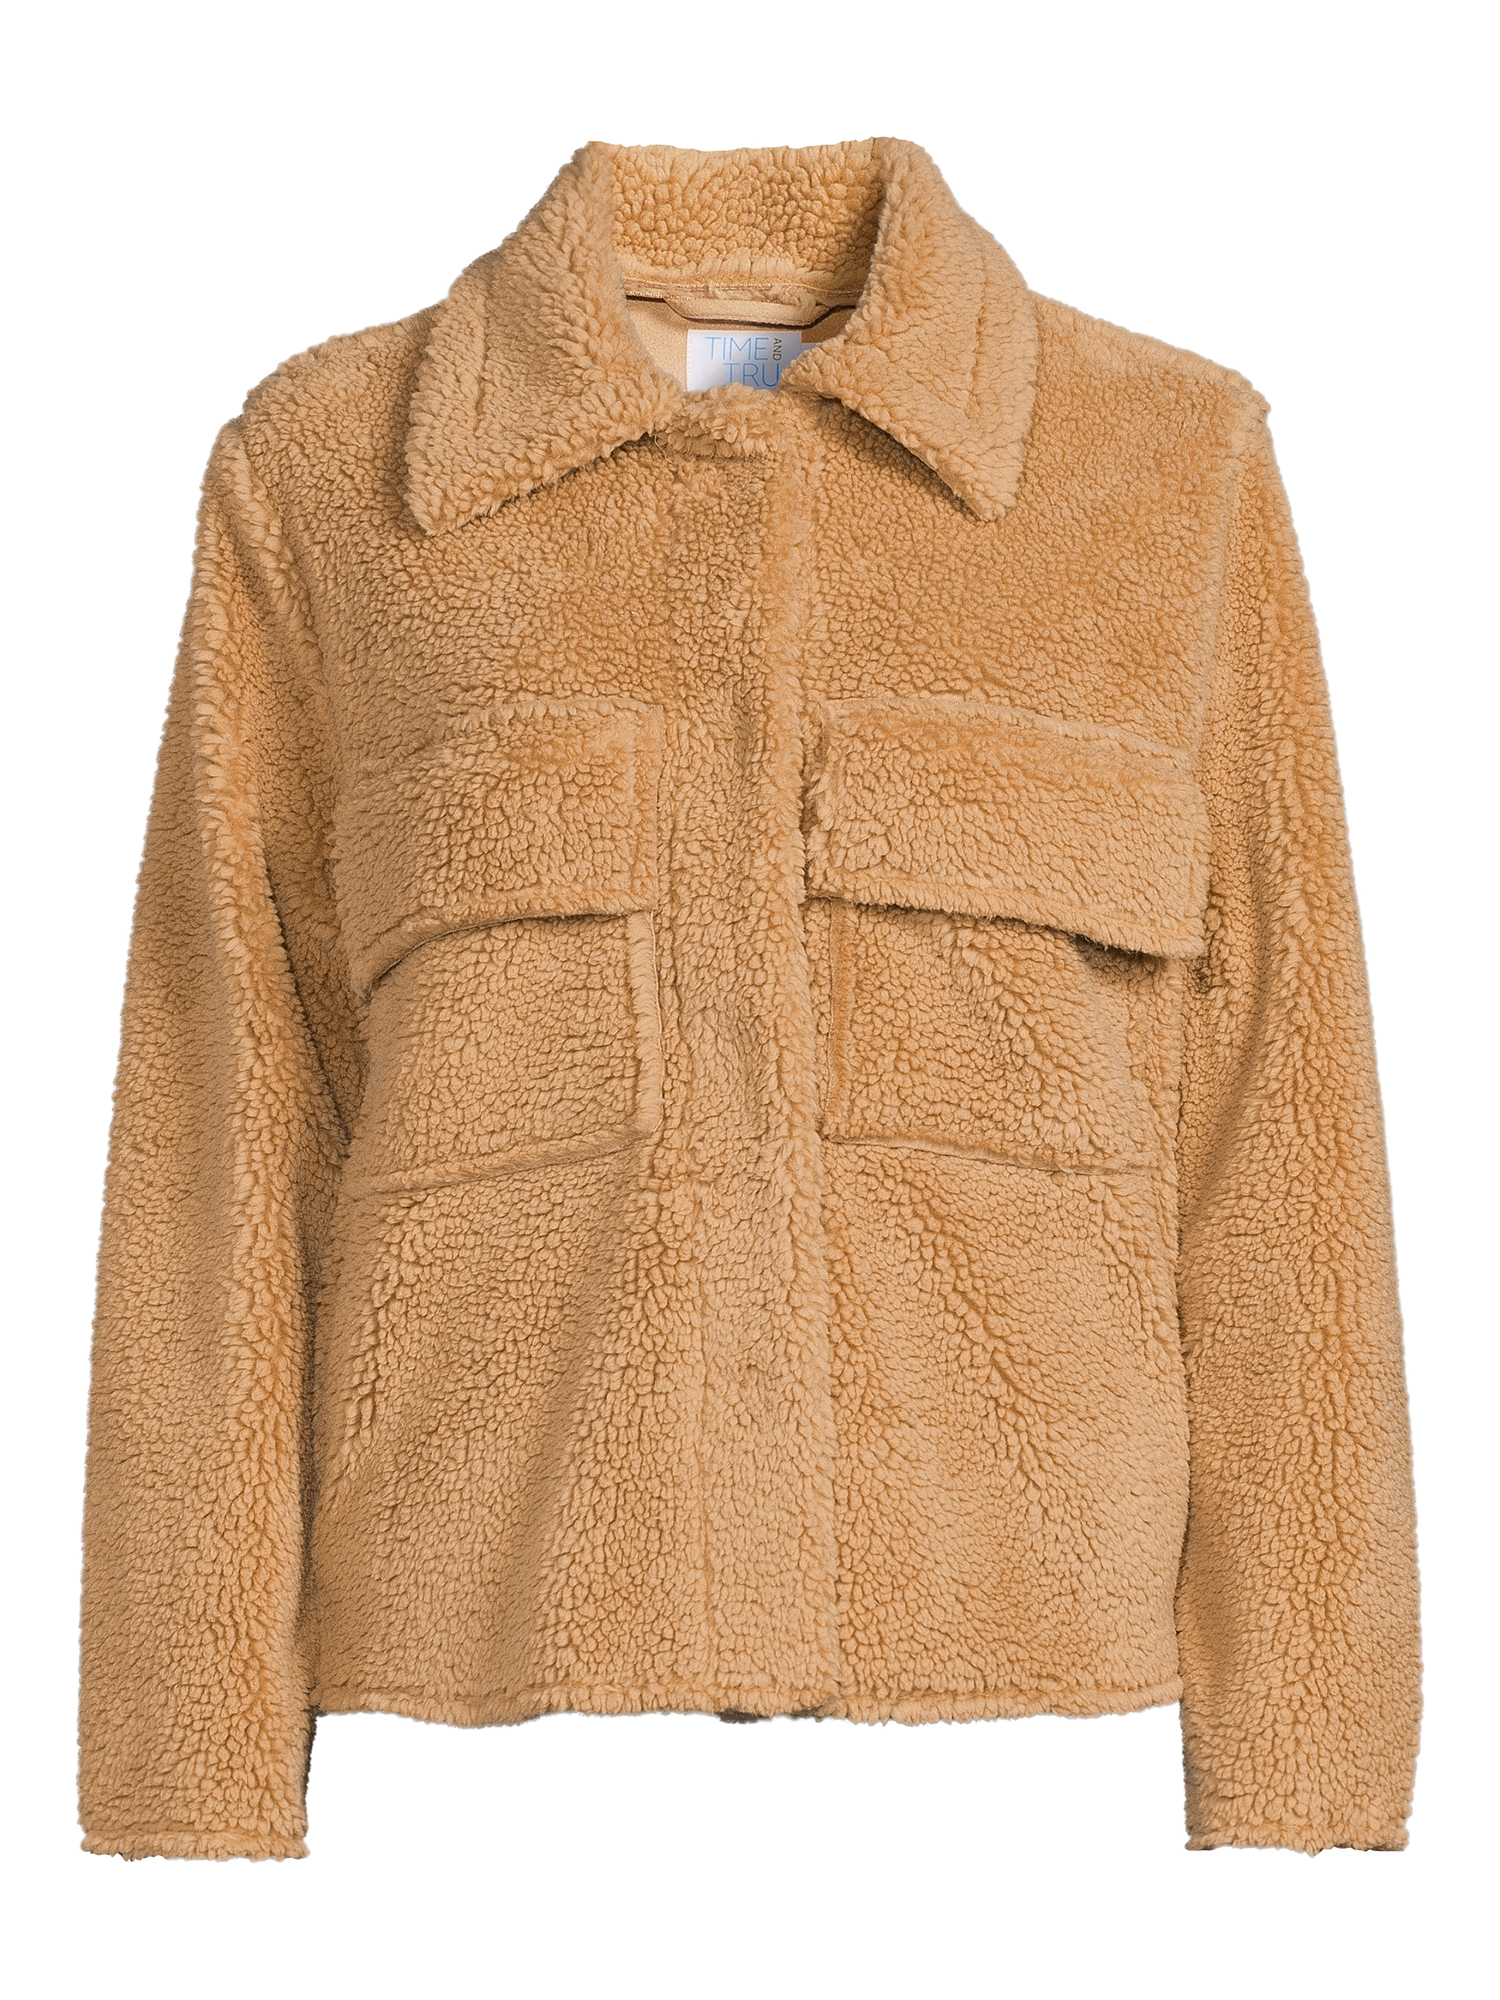 Time and Tru Women's Sherpa Jacket - image 5 of 5